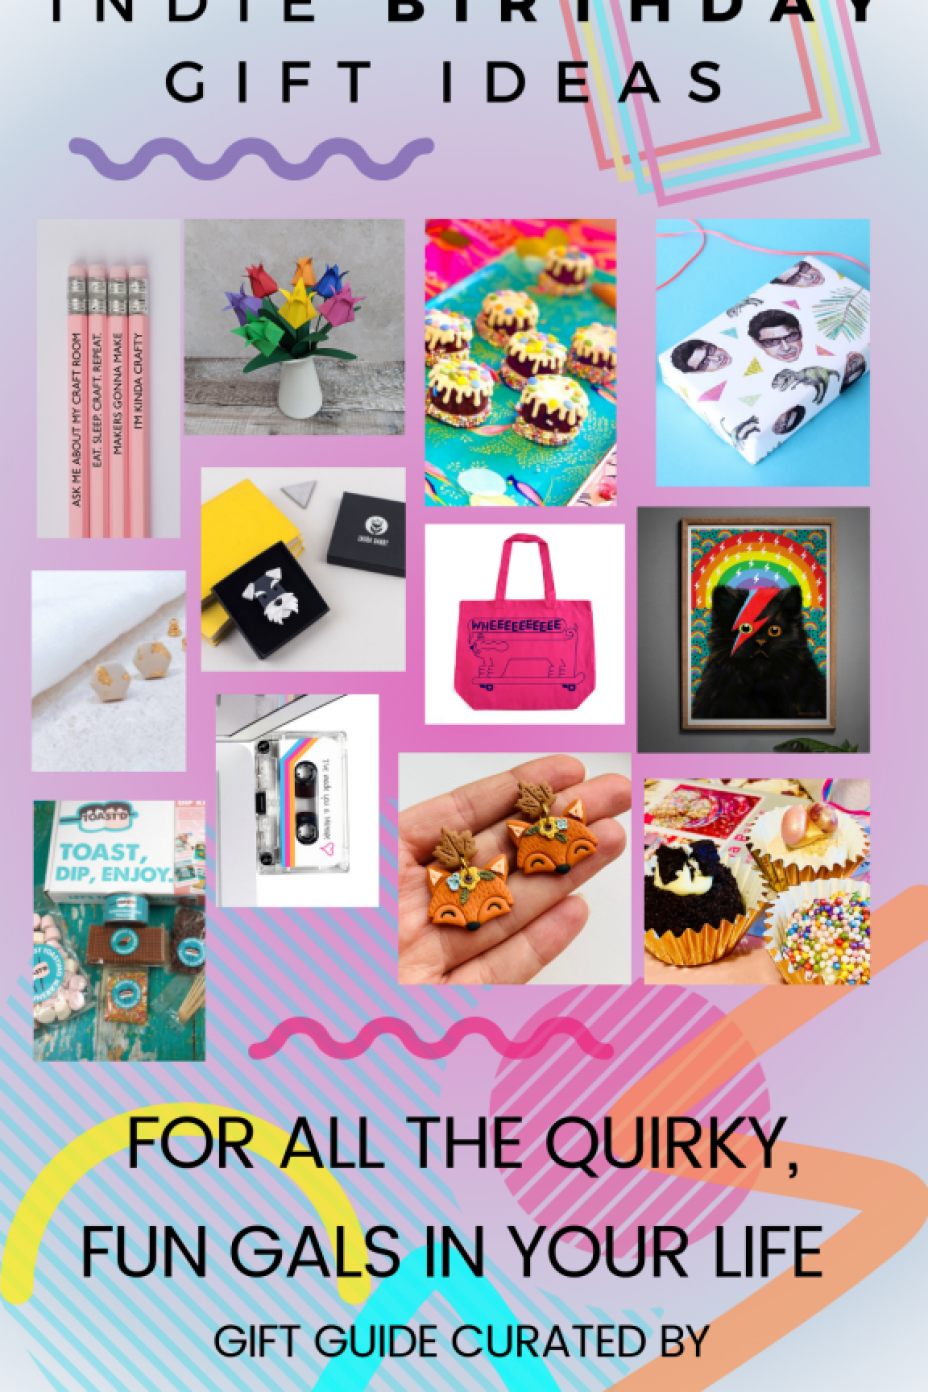 Indie Birthday gift ideas for all the quirky, fun gals in your life